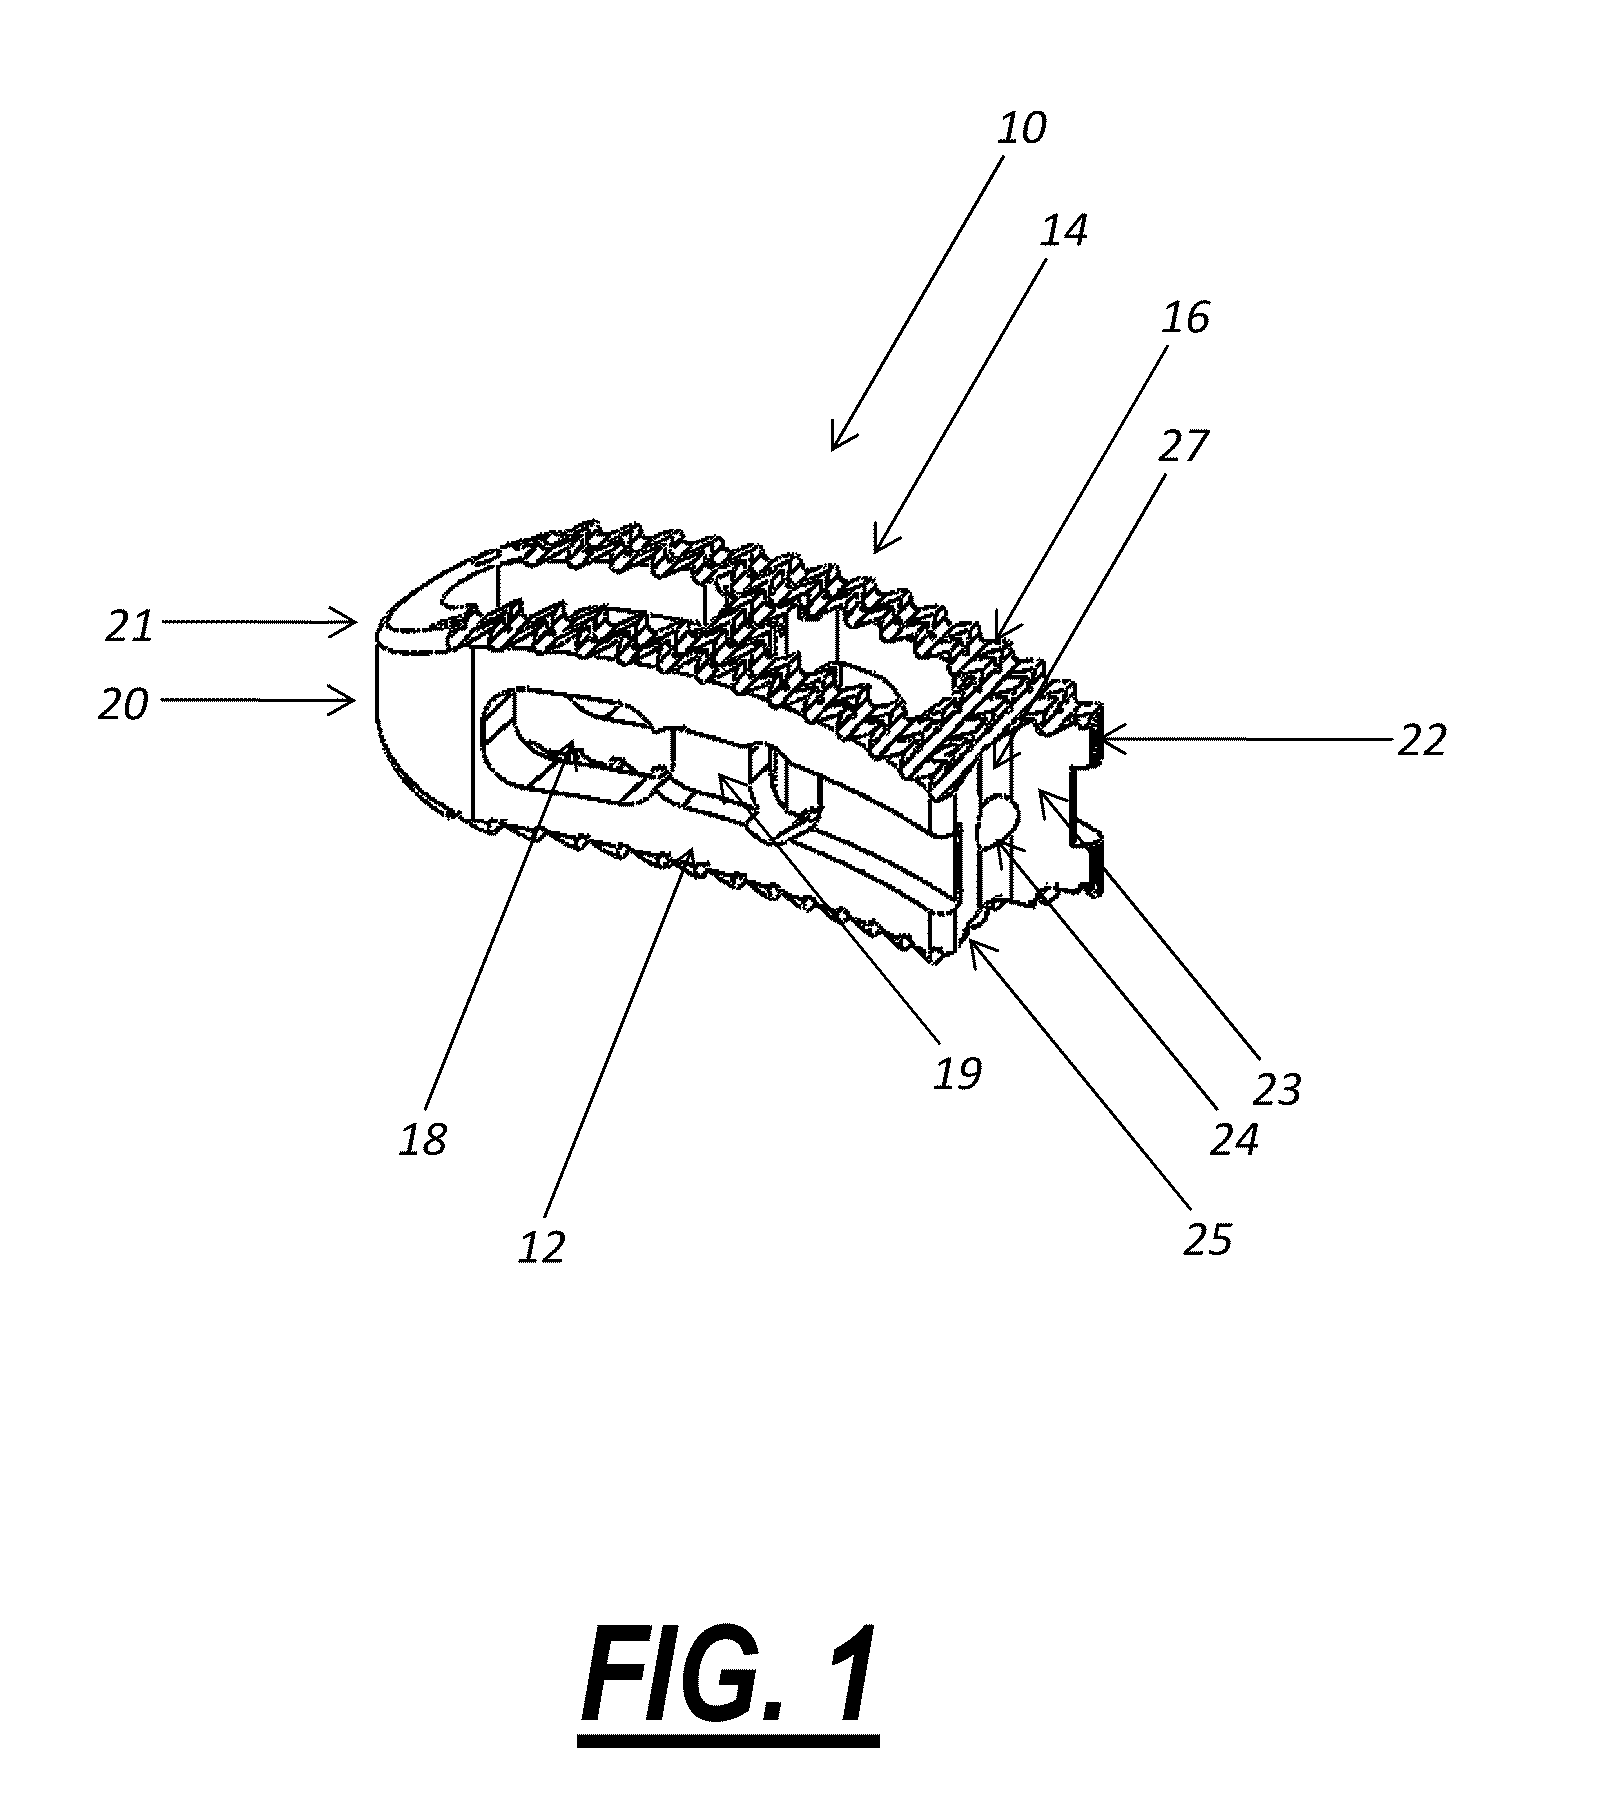 Intervertebral implant device for a posterior interbody fusion surgical procedure